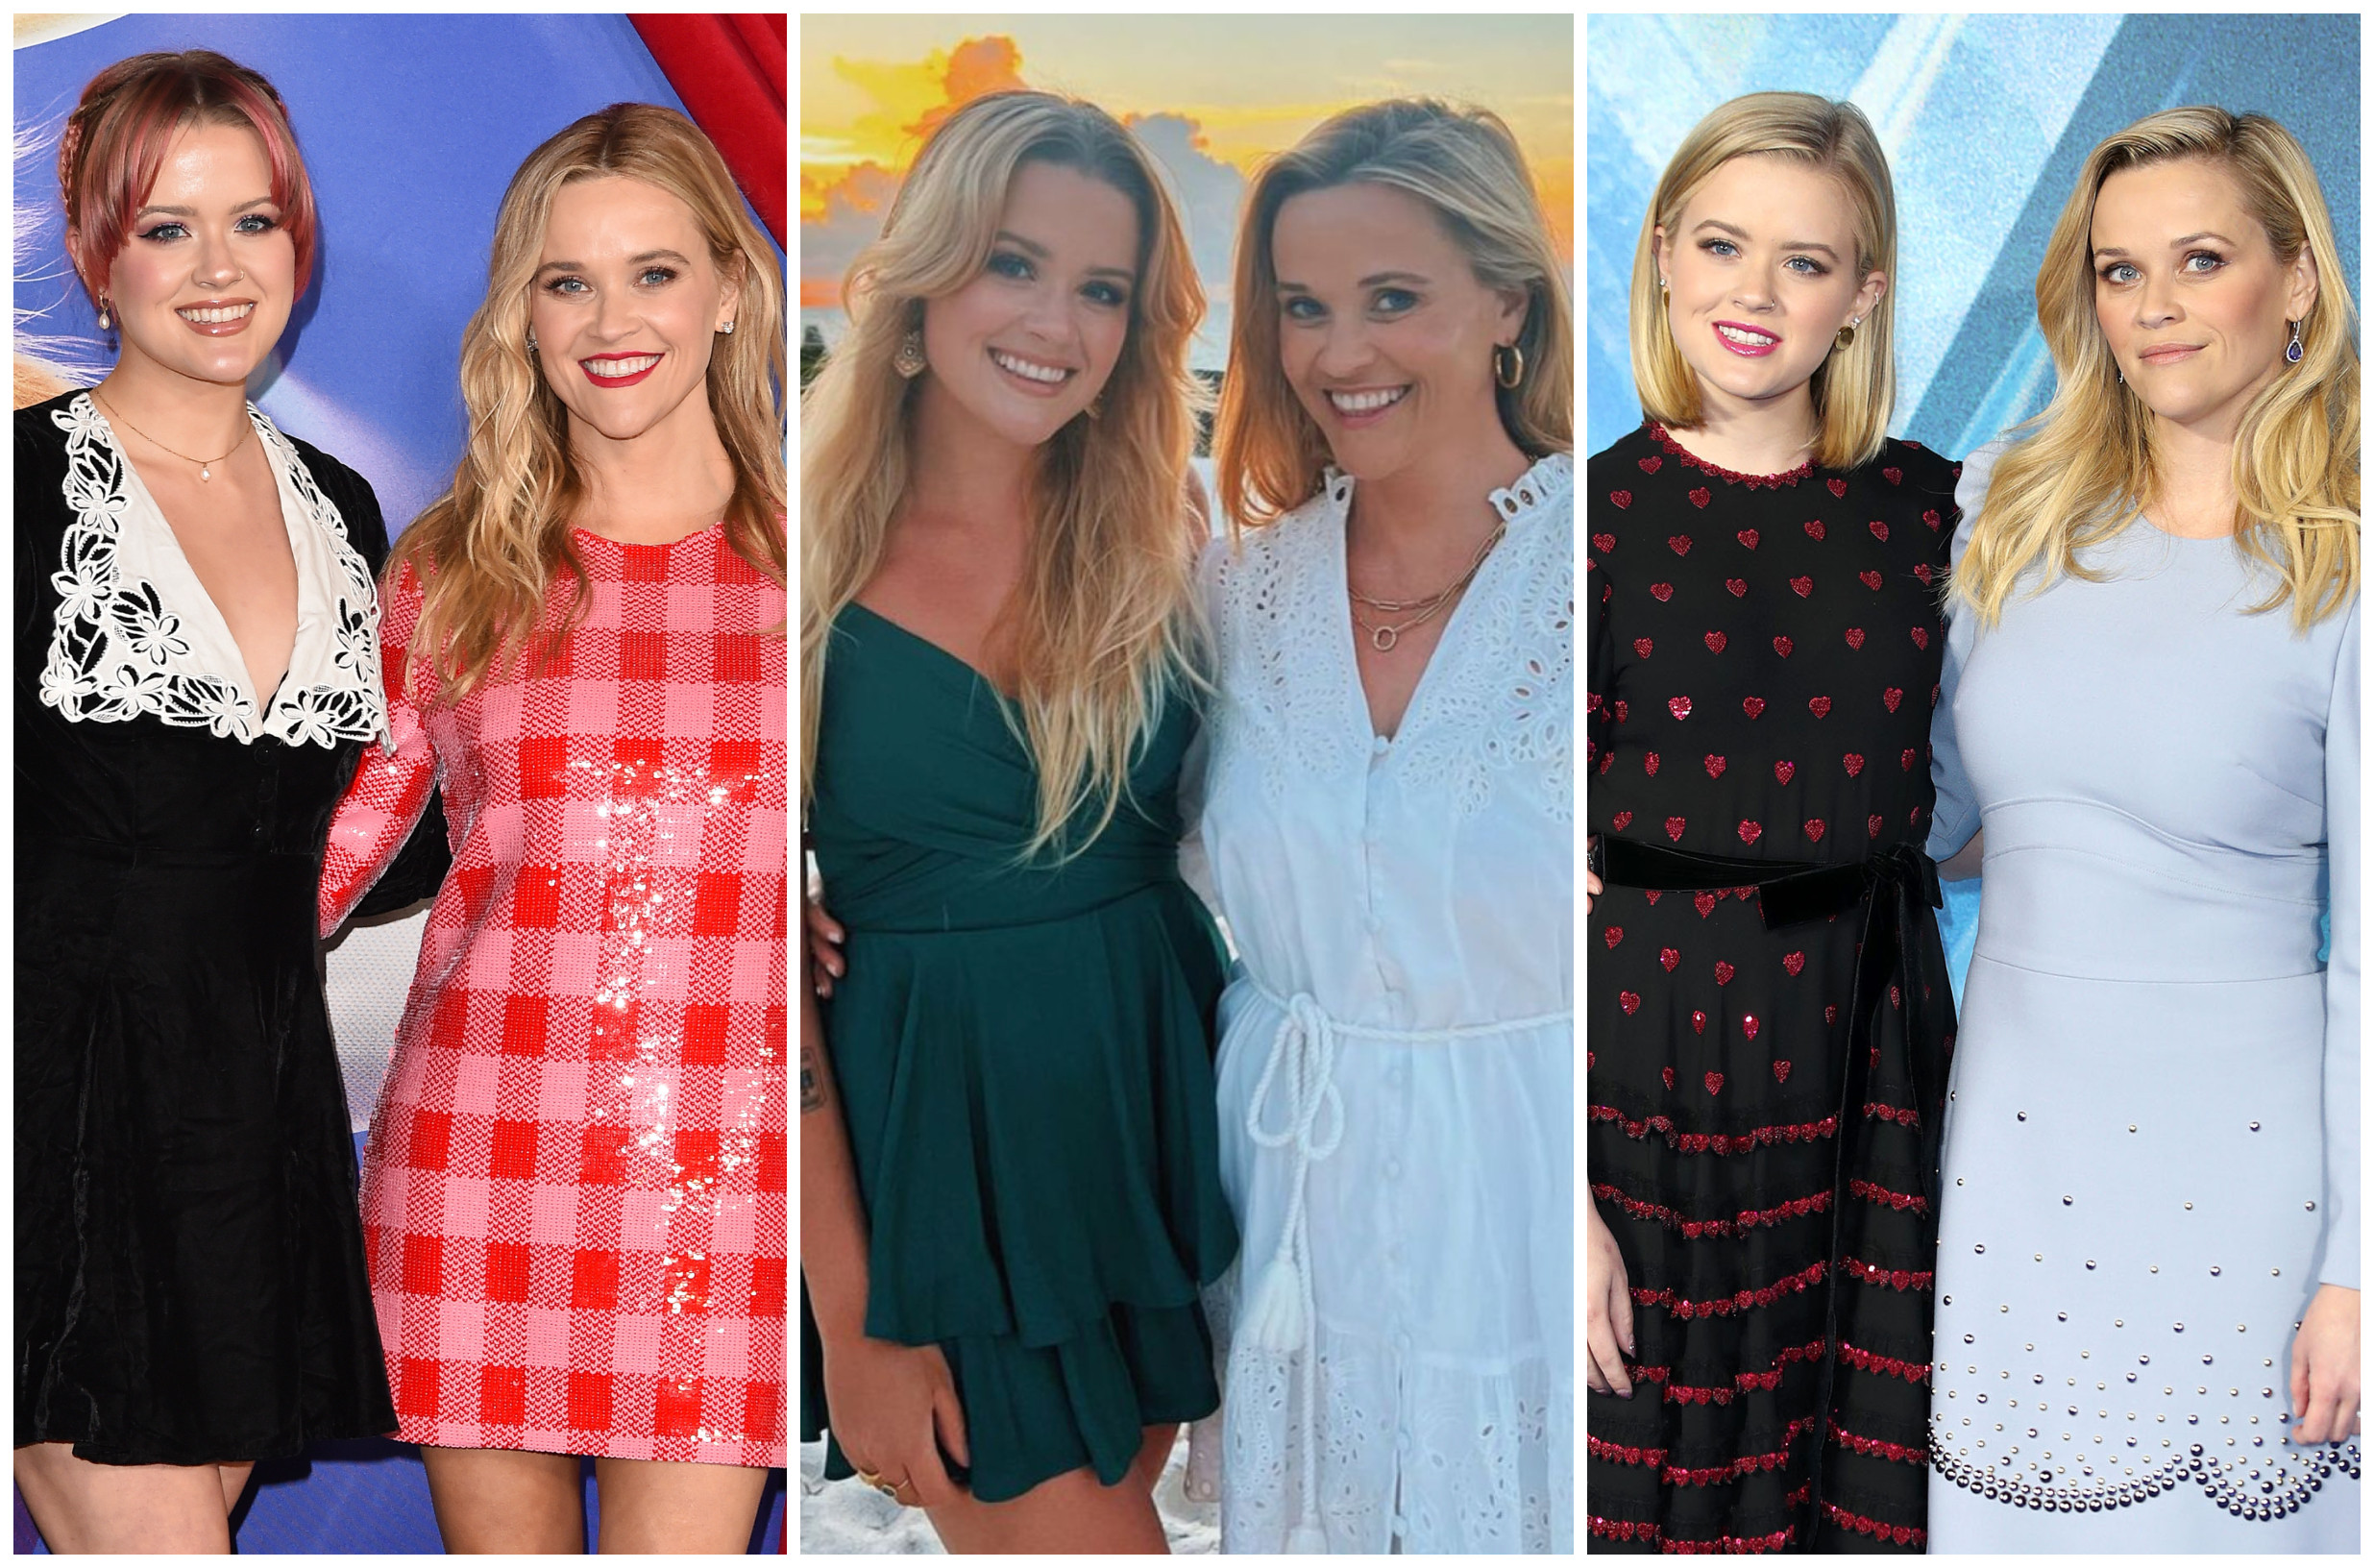 Reese Witherspoon and Ava Phillippe’s looks always seem to complement each other. Photos: FilmMagic, @reesewitherspoon/Instagram, WireImage